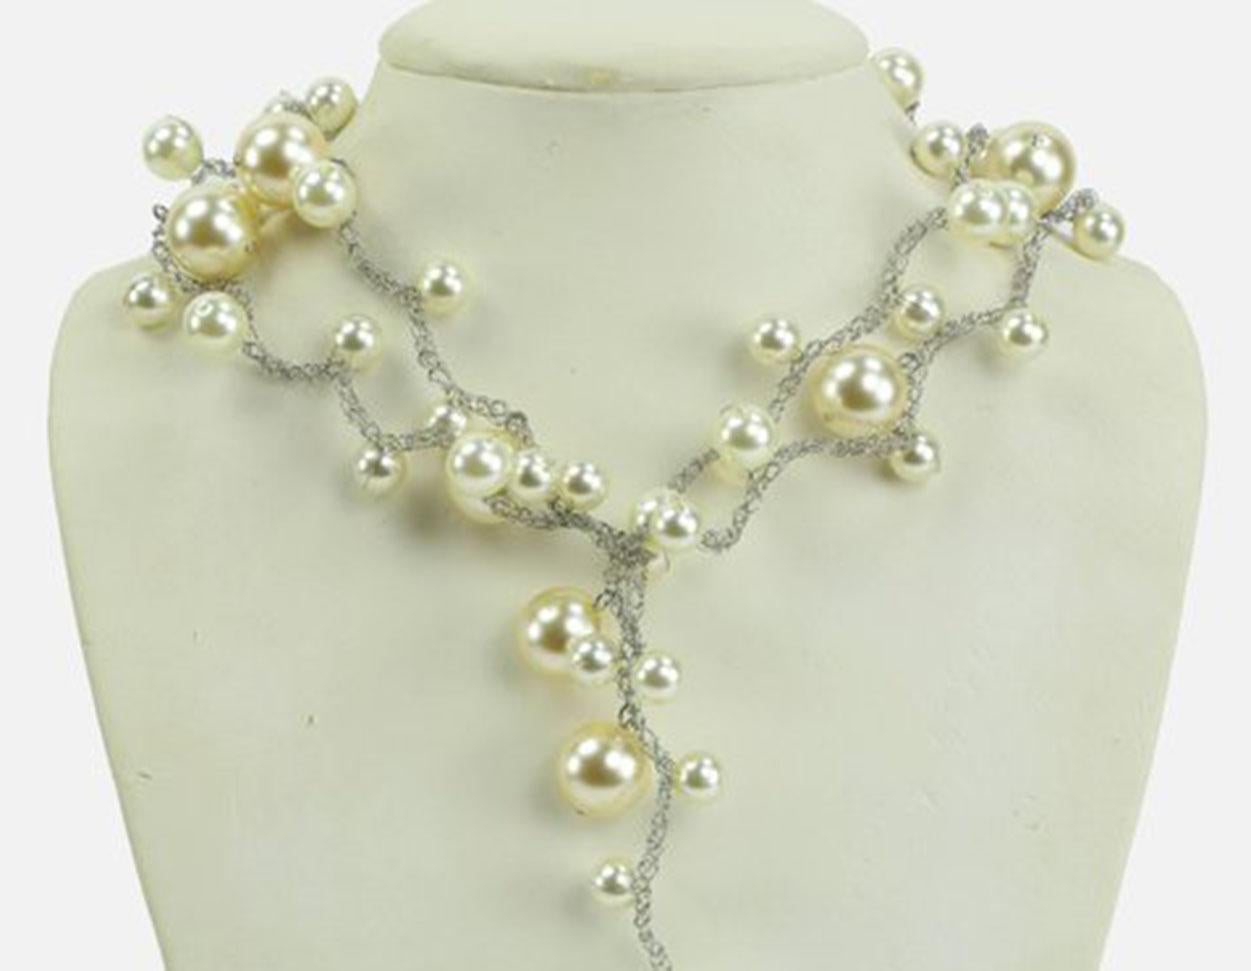 Long Elegant and Stylish Vintage Necklace made of graduated round Faux White Pearls on braided stainless steel wire chain; approx. pearl sizes: large 17mm; medium 12mm and small beads 7.5mm; approx. length of Necklace: 46